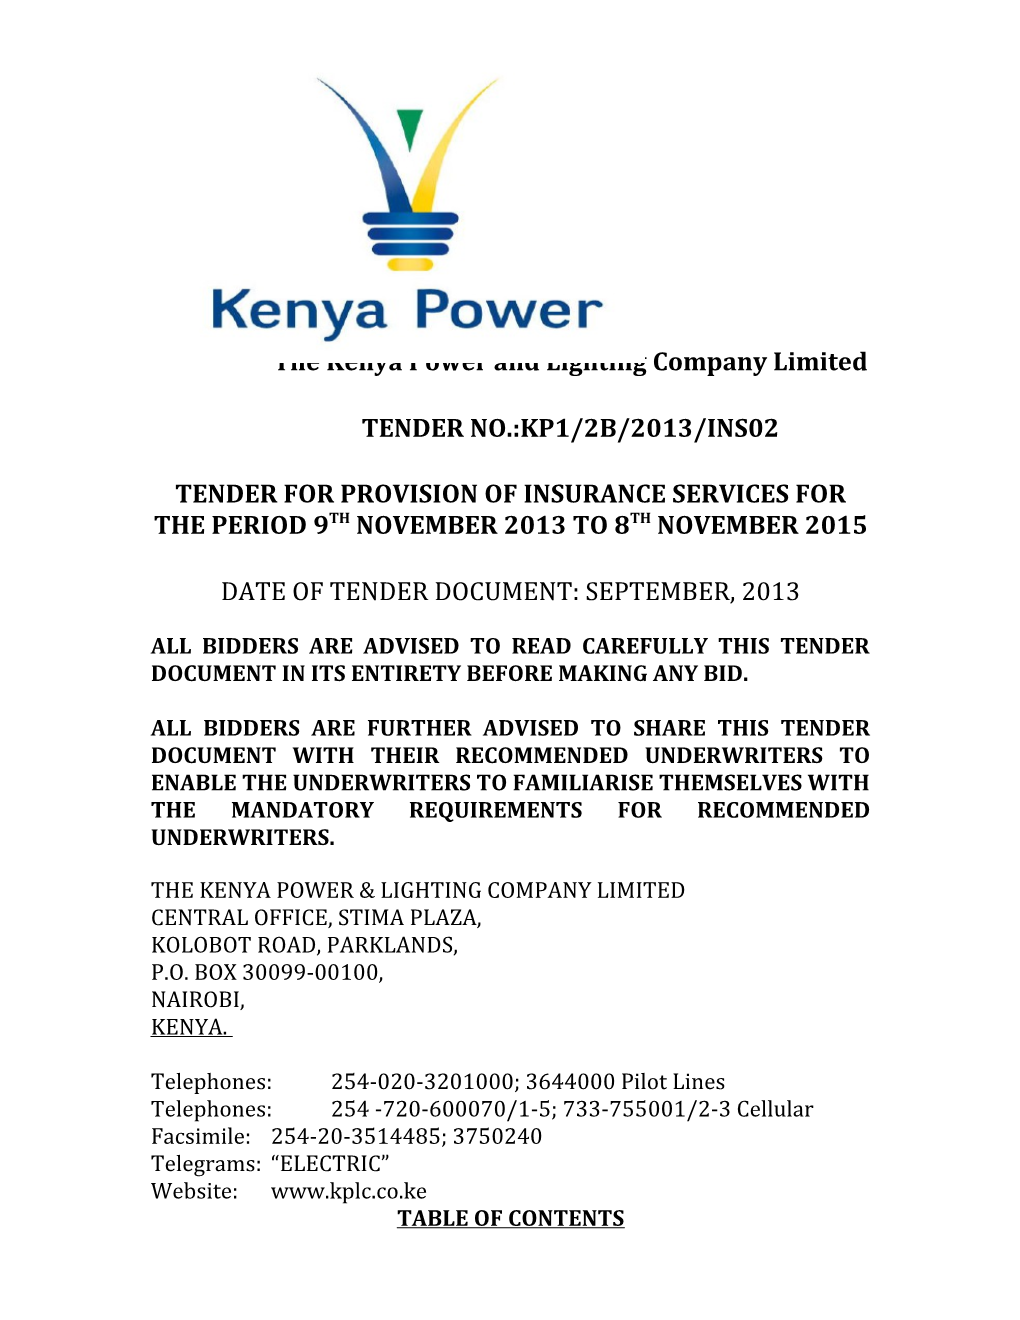 The Kenya Power and Lighting Company Limited